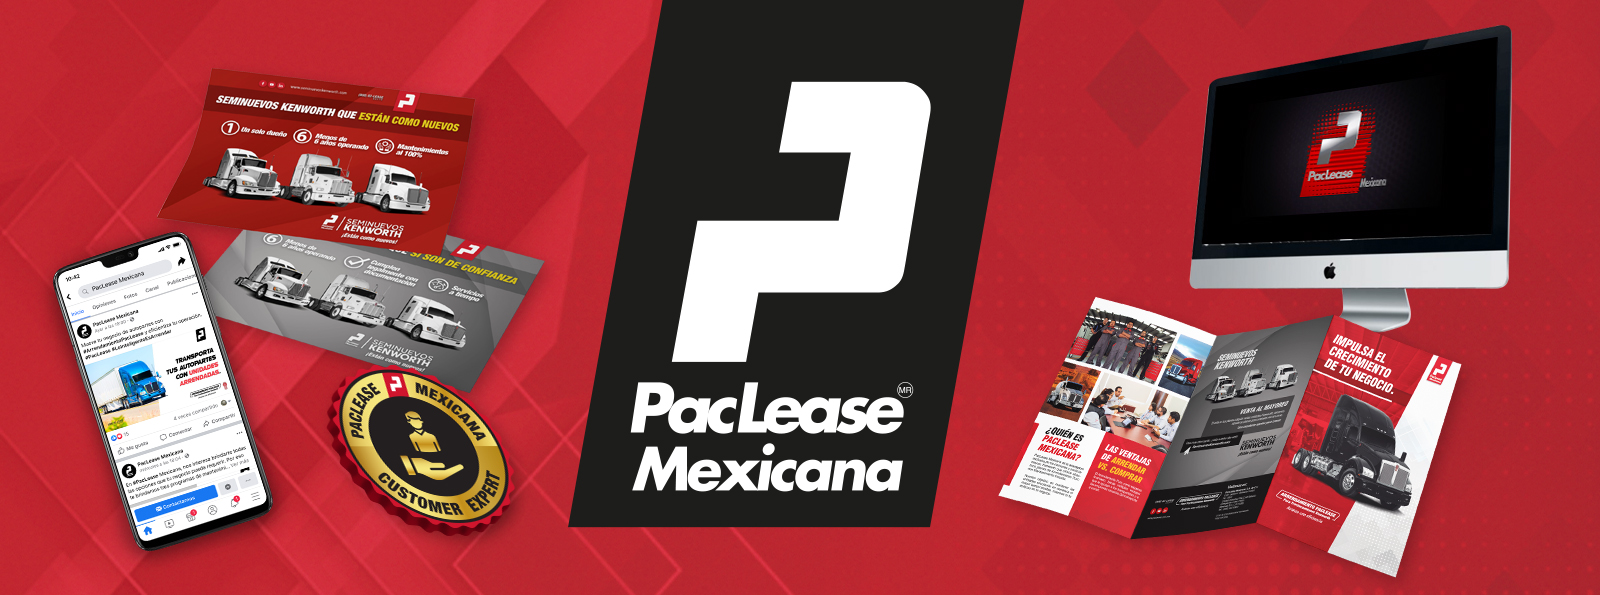 PacLease Mexicana